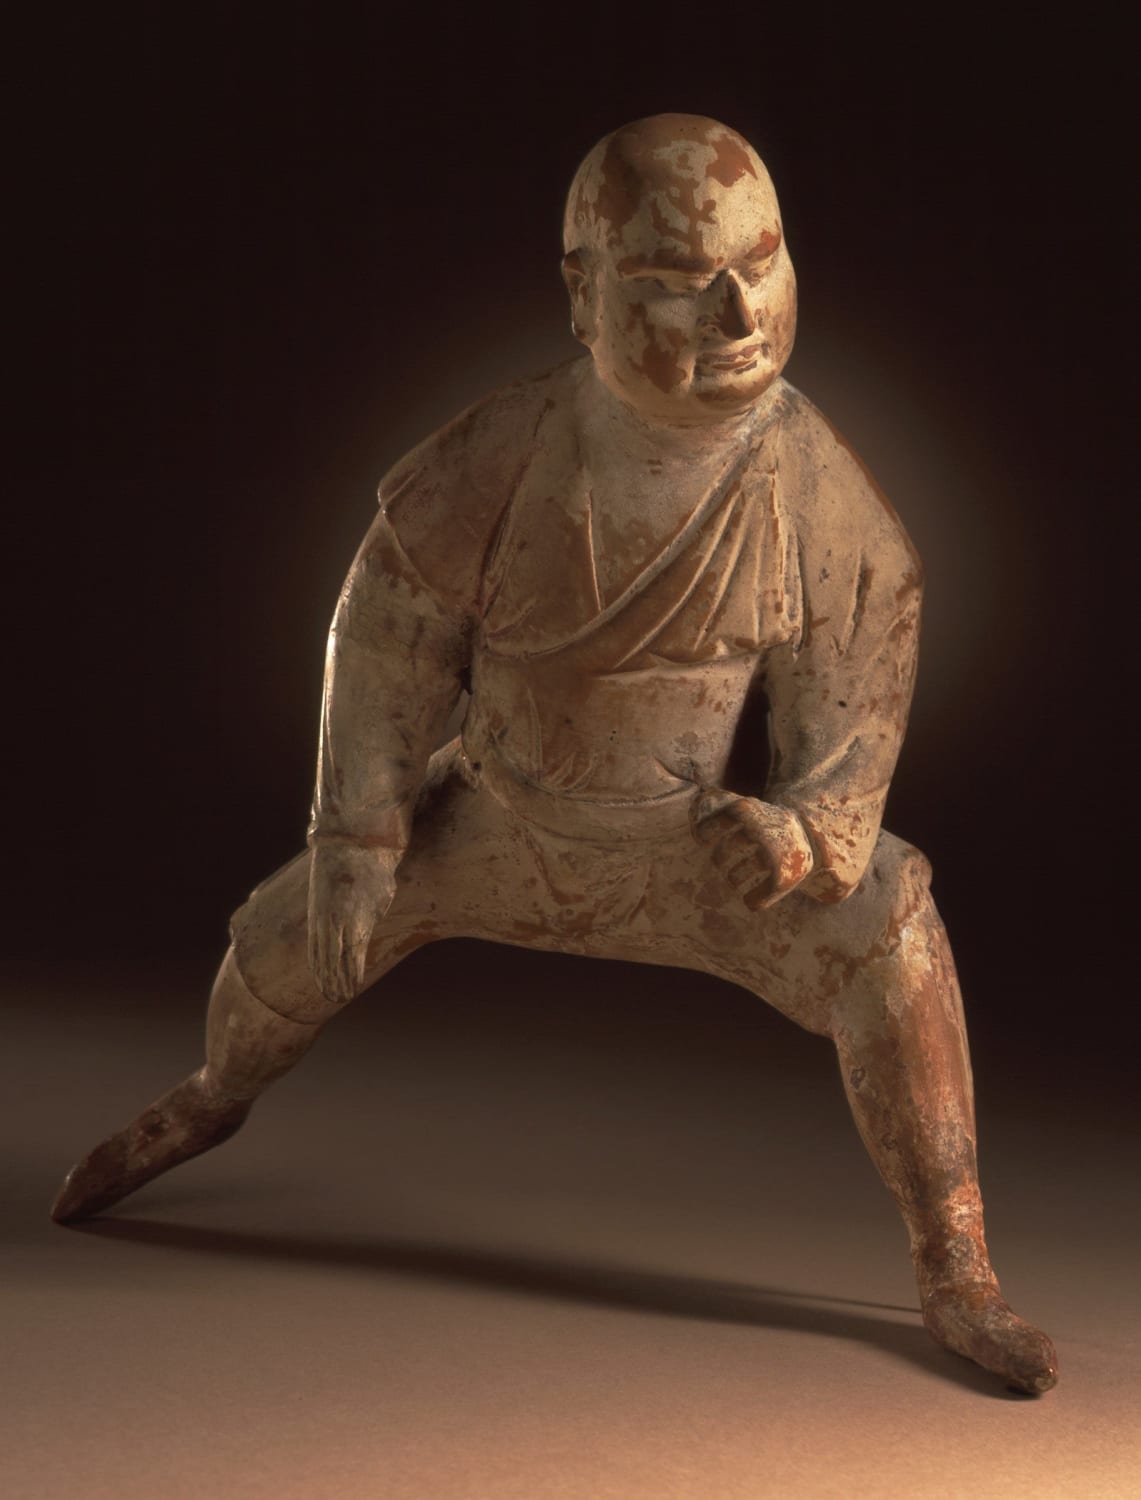 Tomb sculpture of a wrestler. China, Tang Dynasty, 700-800 AD